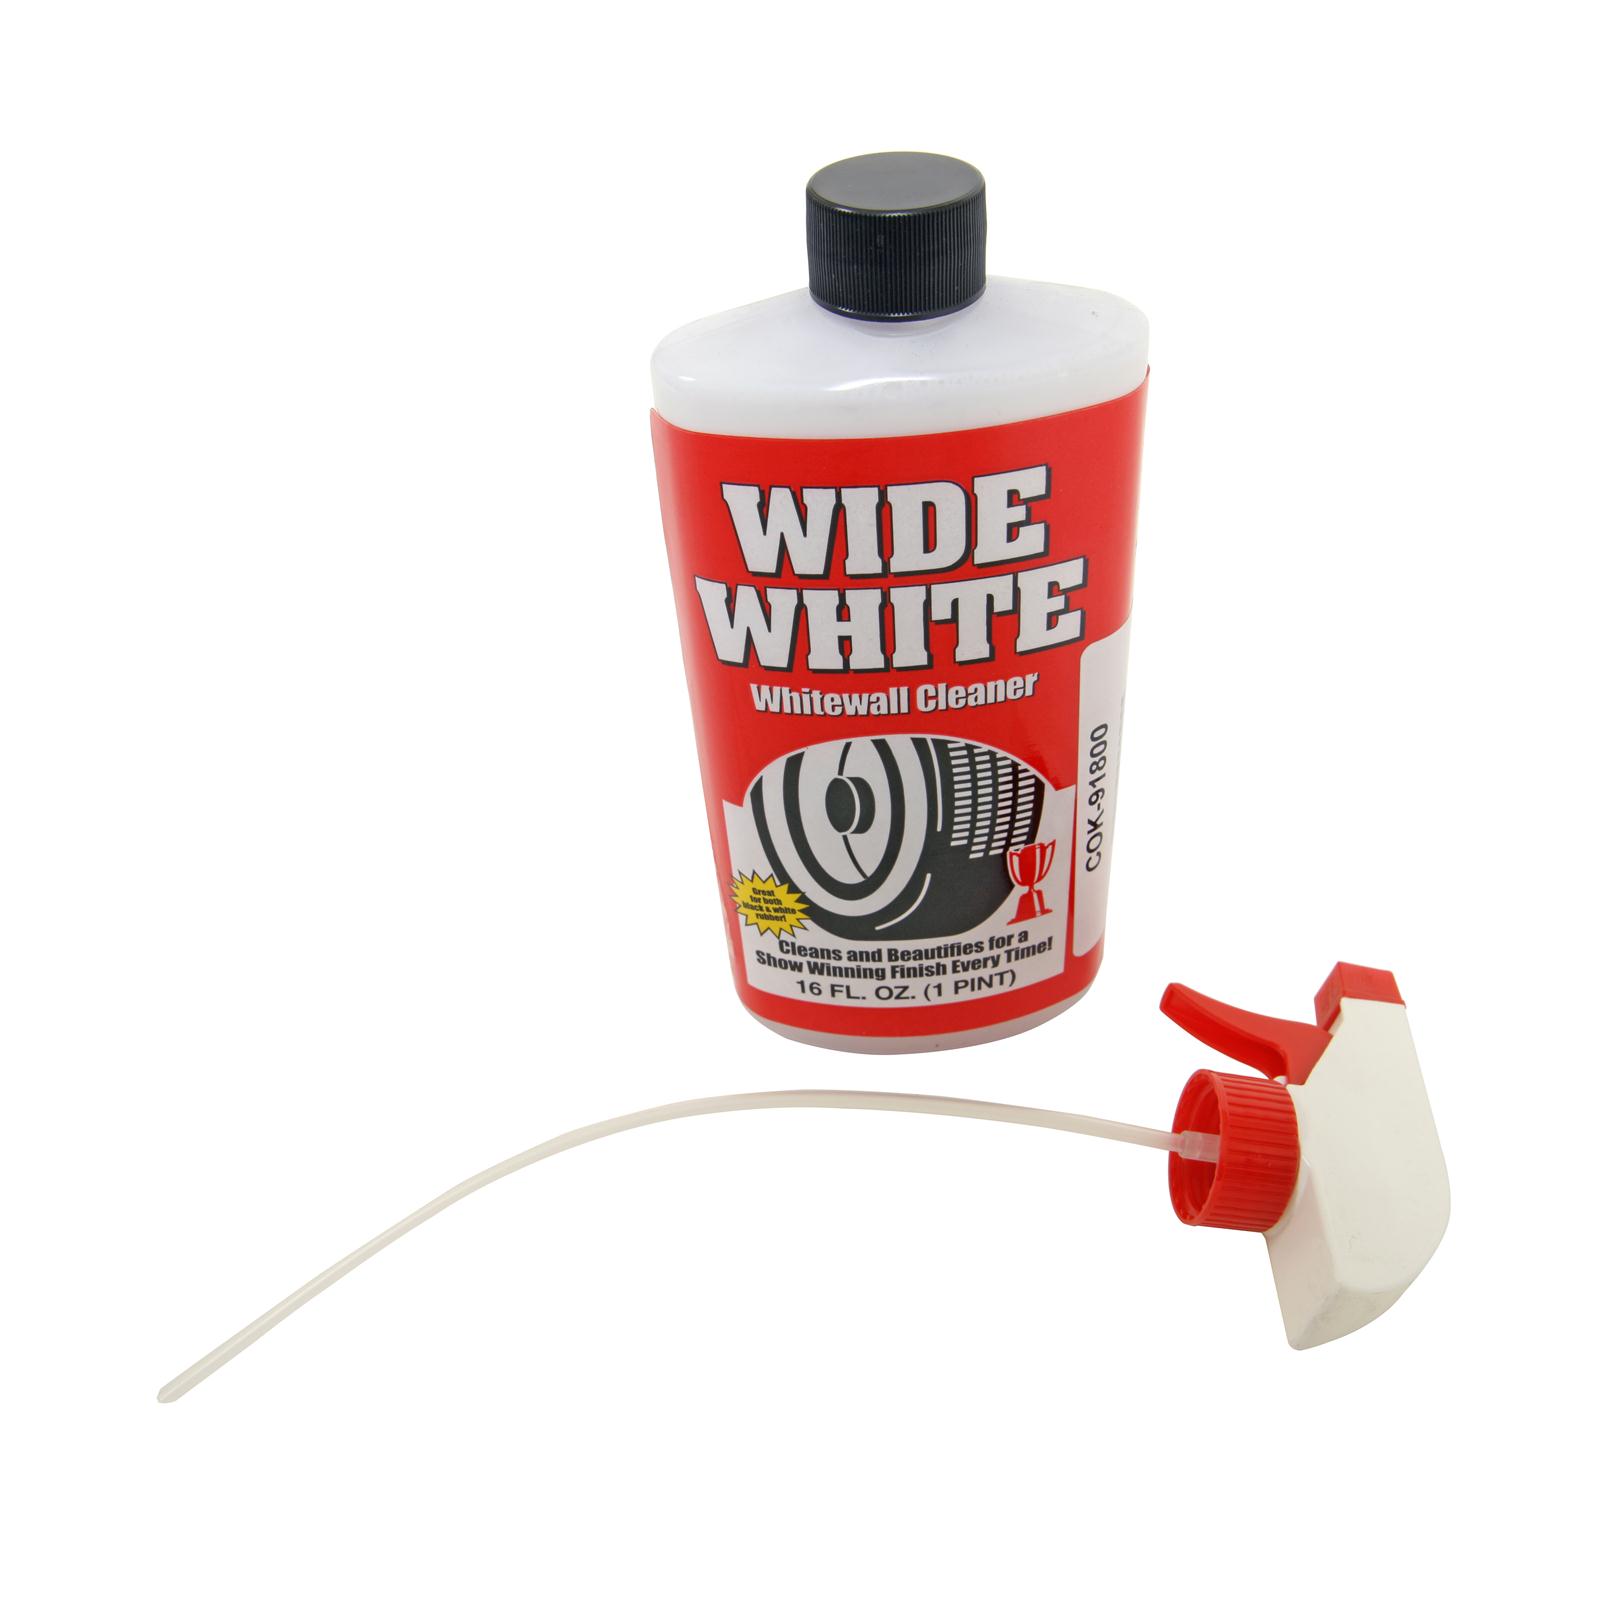 Coker Tire Wide White Whitewall Tire Cleaner Spray 91800, Best White Wall  Tire Cleaner for Cars & Motorcycles